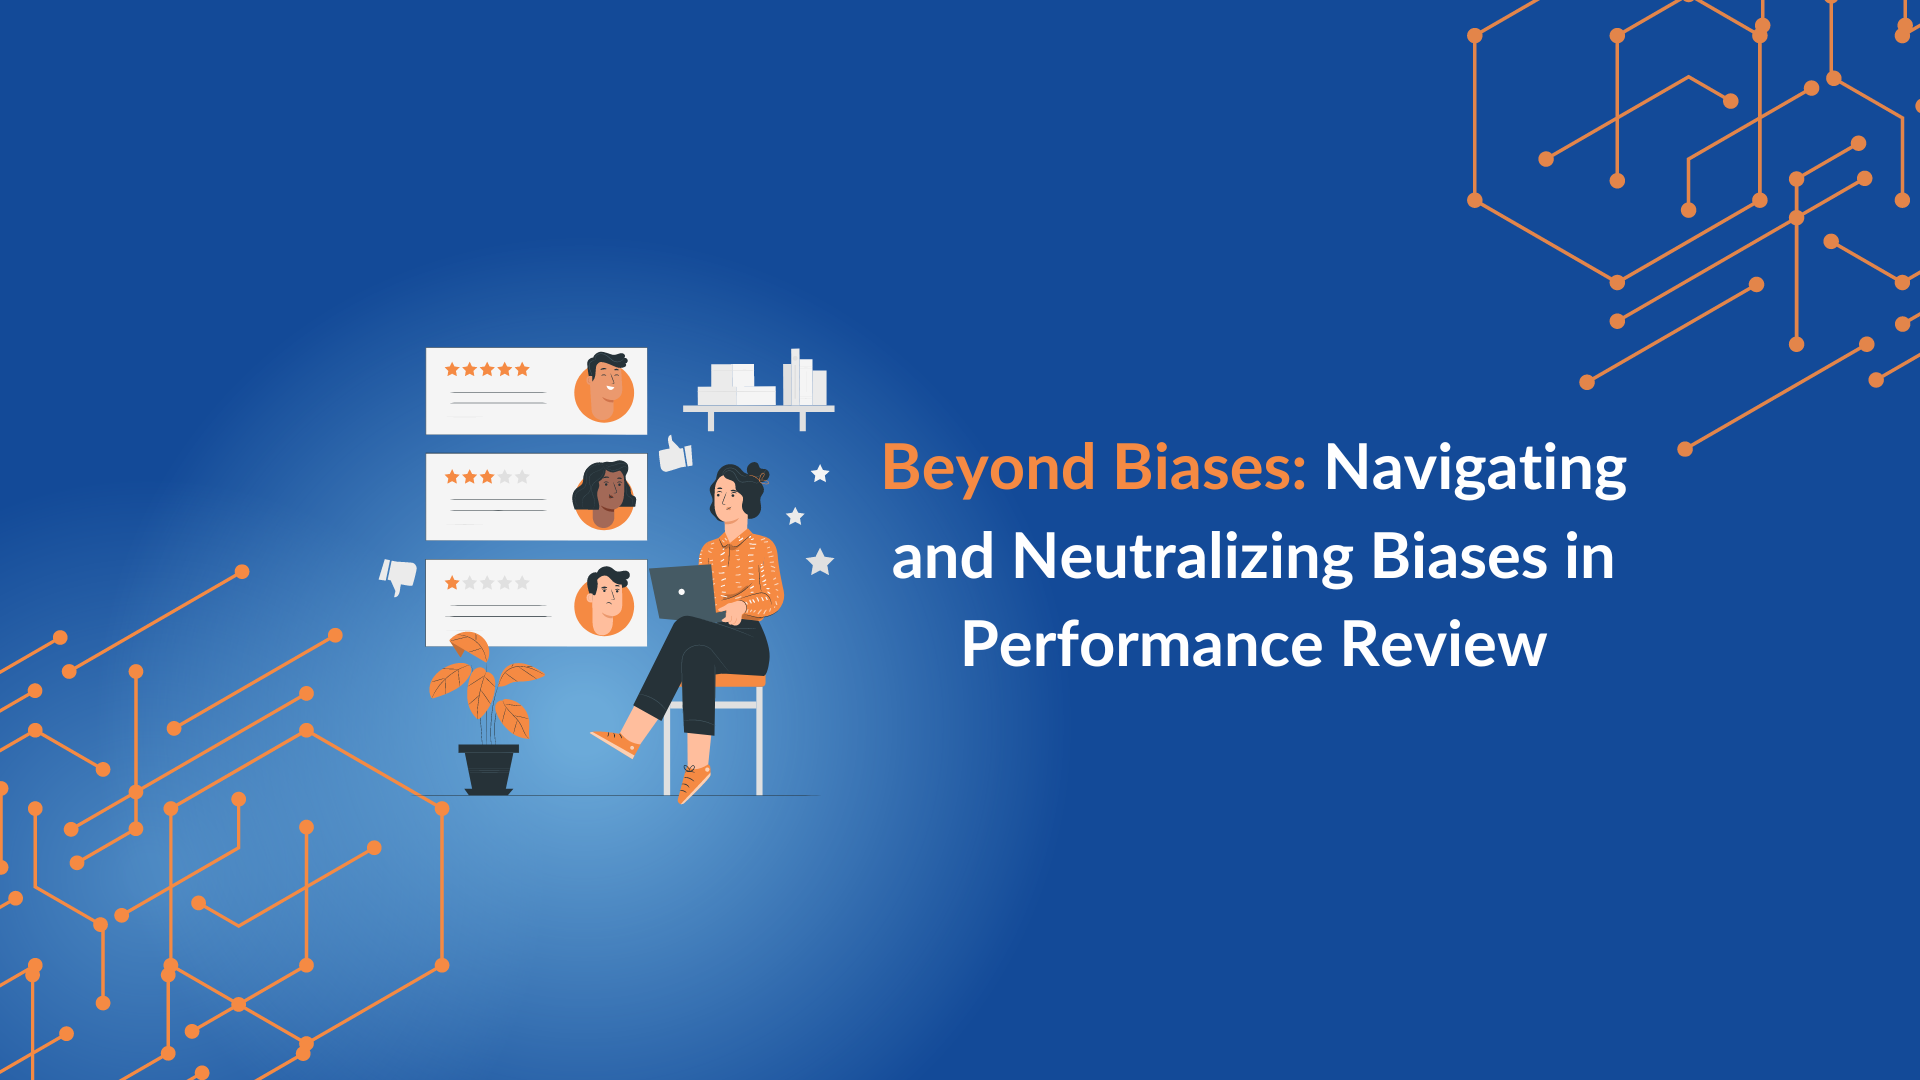 Beyond Biases: Navigating and Neutralizing Biases in Performance Reviews